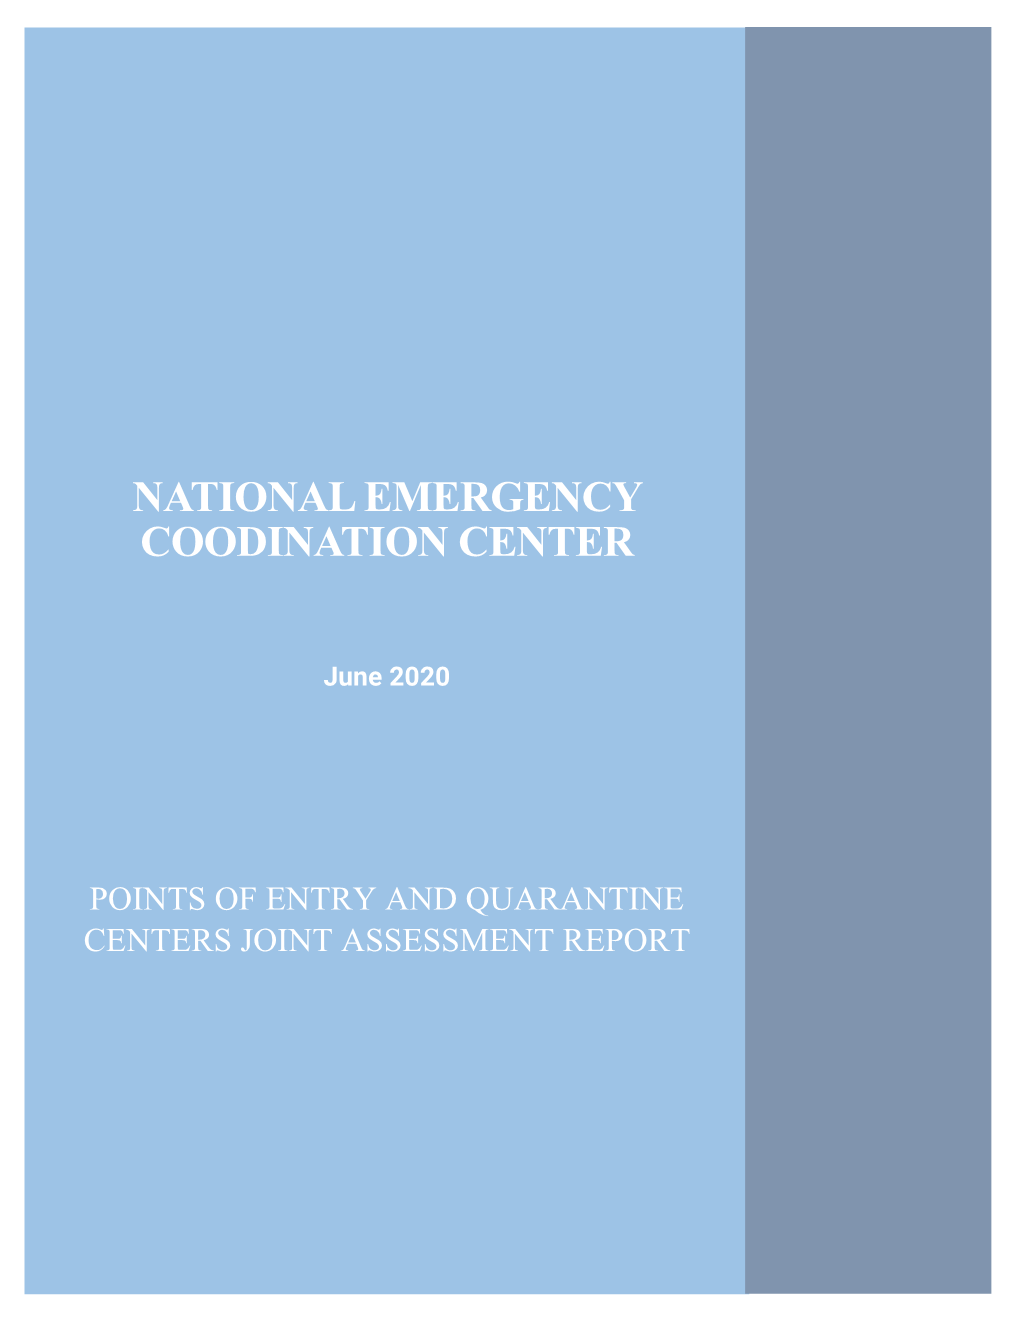 National Emergency Coodination Center